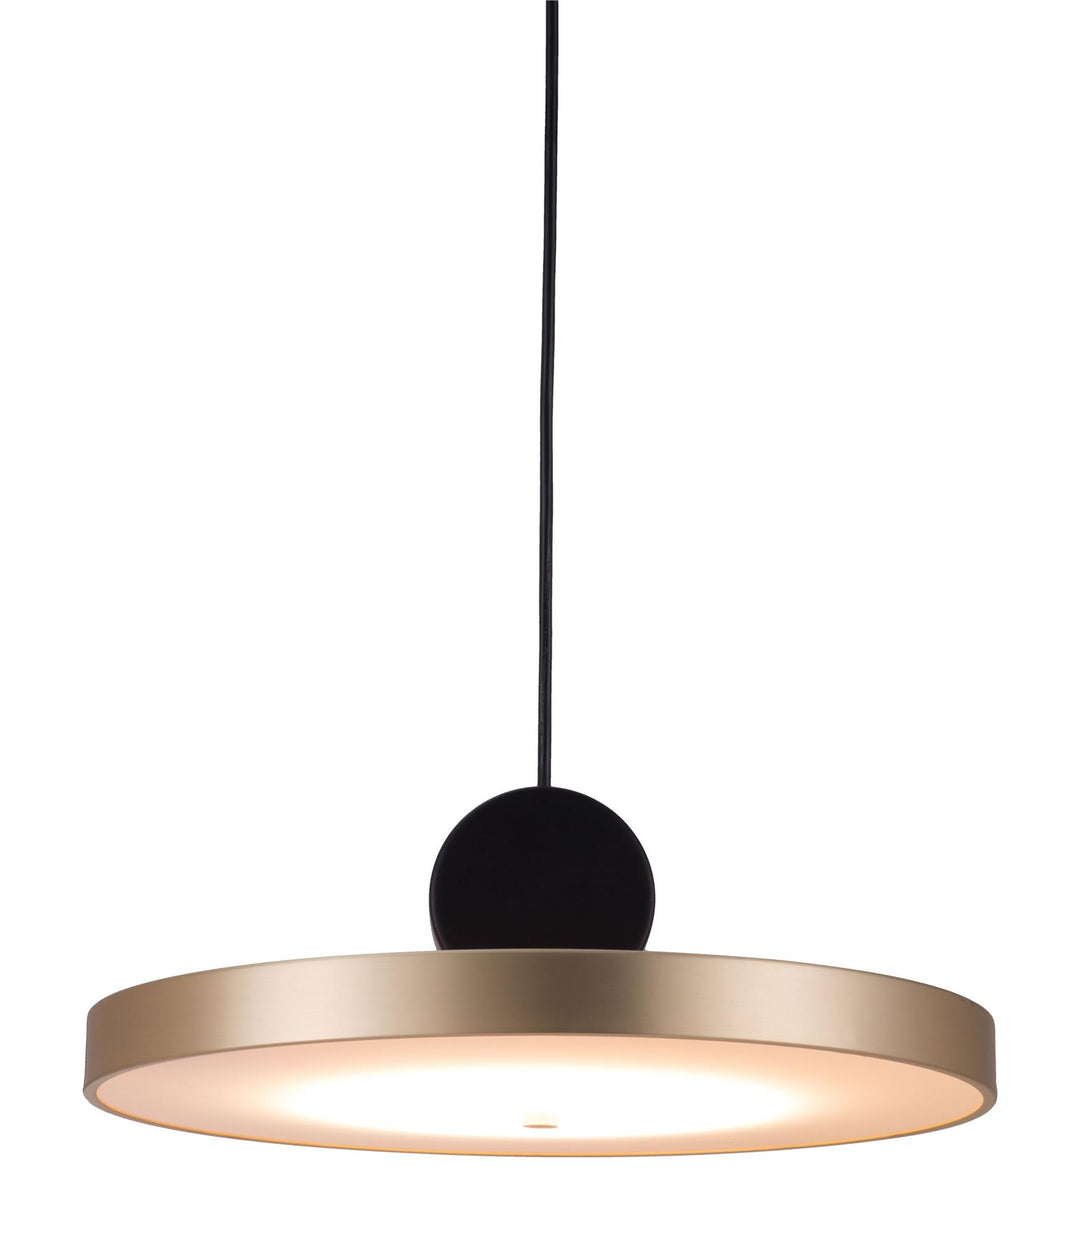 Easy-to-adjust cord ceiling light by Nadia -  N/A